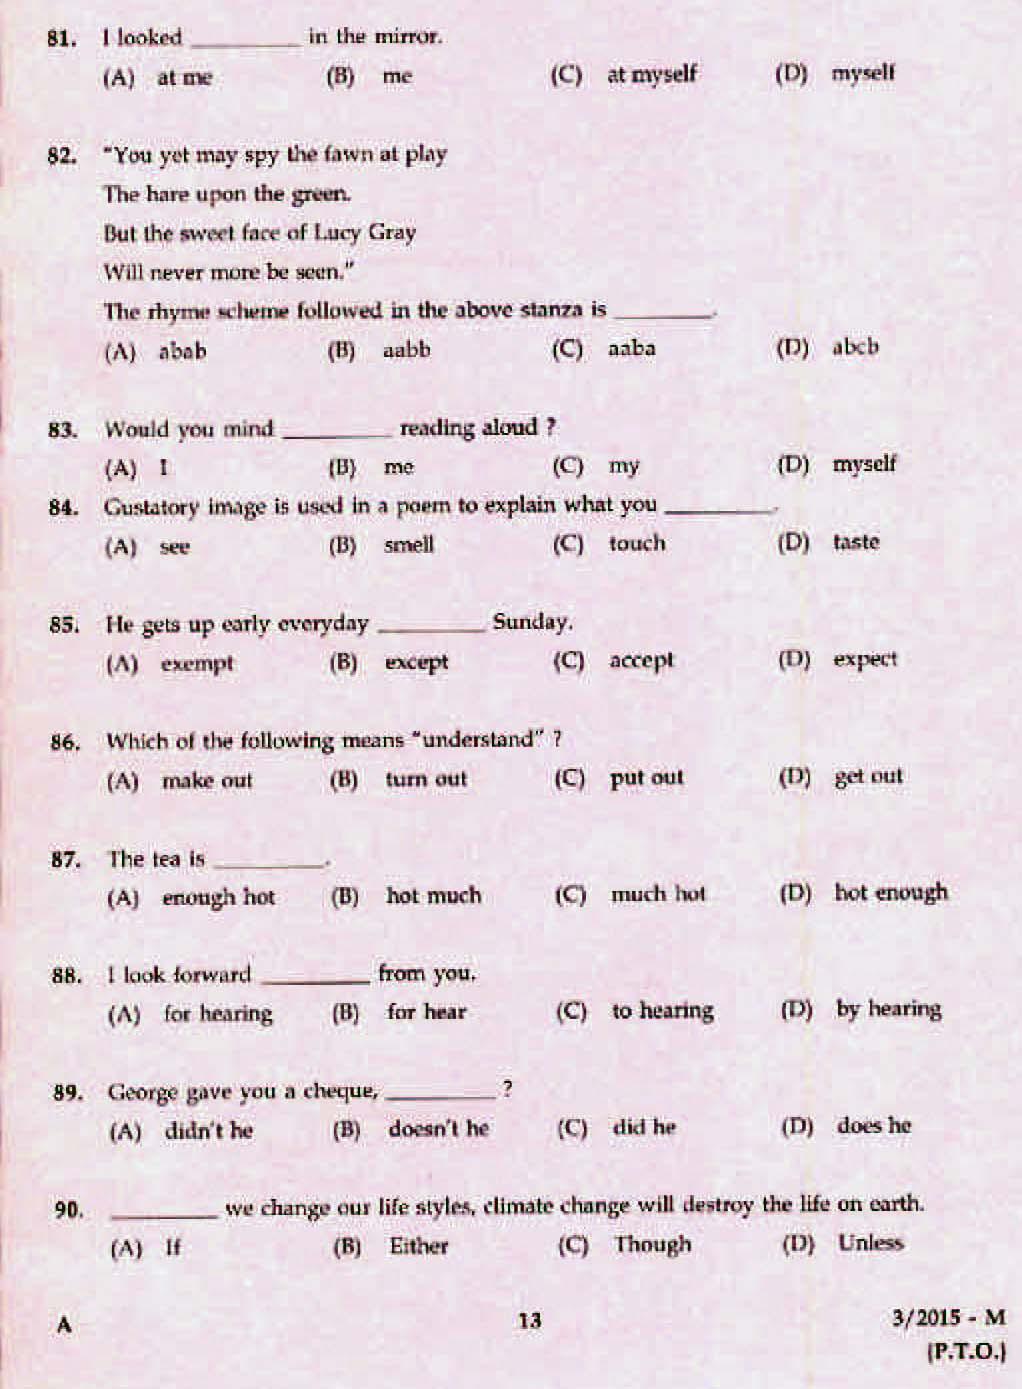 LD Clerk Thrissur District Question Paper Malayalam 2015 Paper Code 32015 M 11